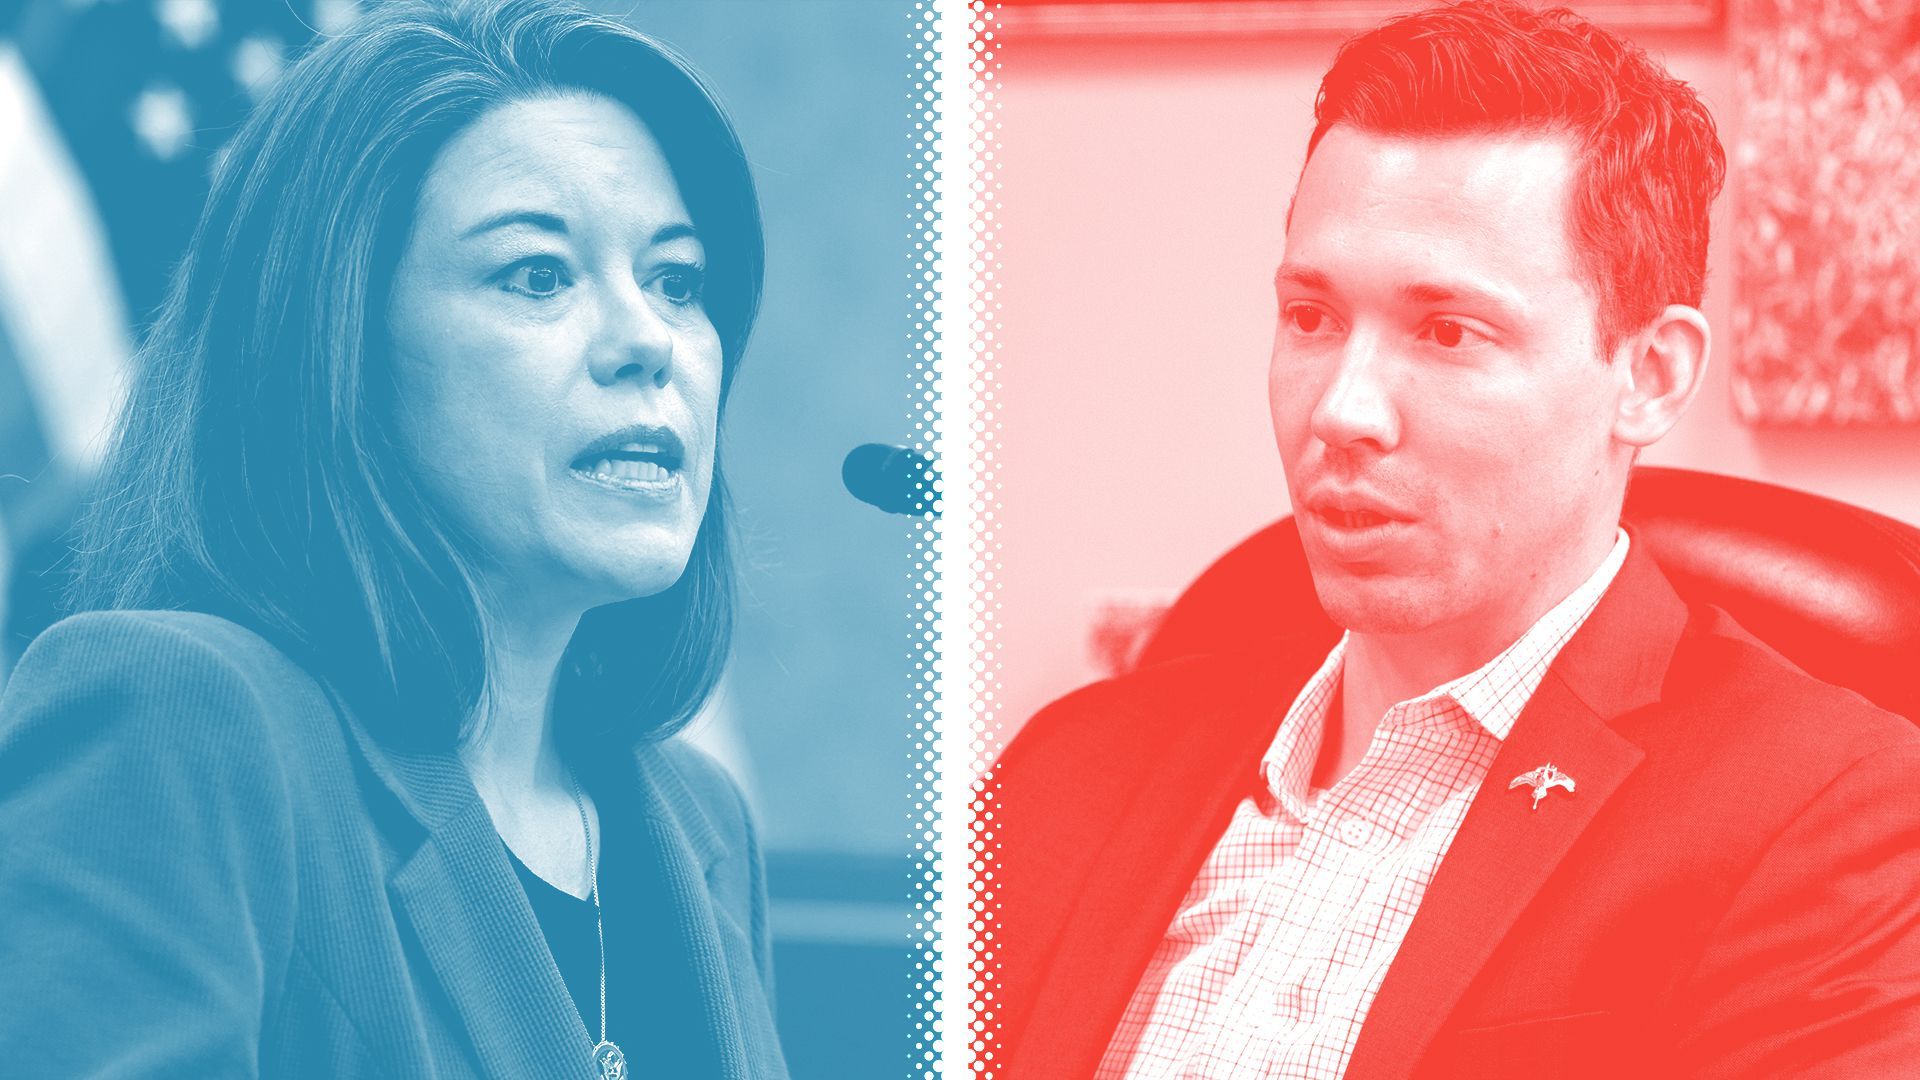 Photo illustration of Angie Craig, tinted blue, and Tyler Kistner, tinted red, separated by a white halftone divider.